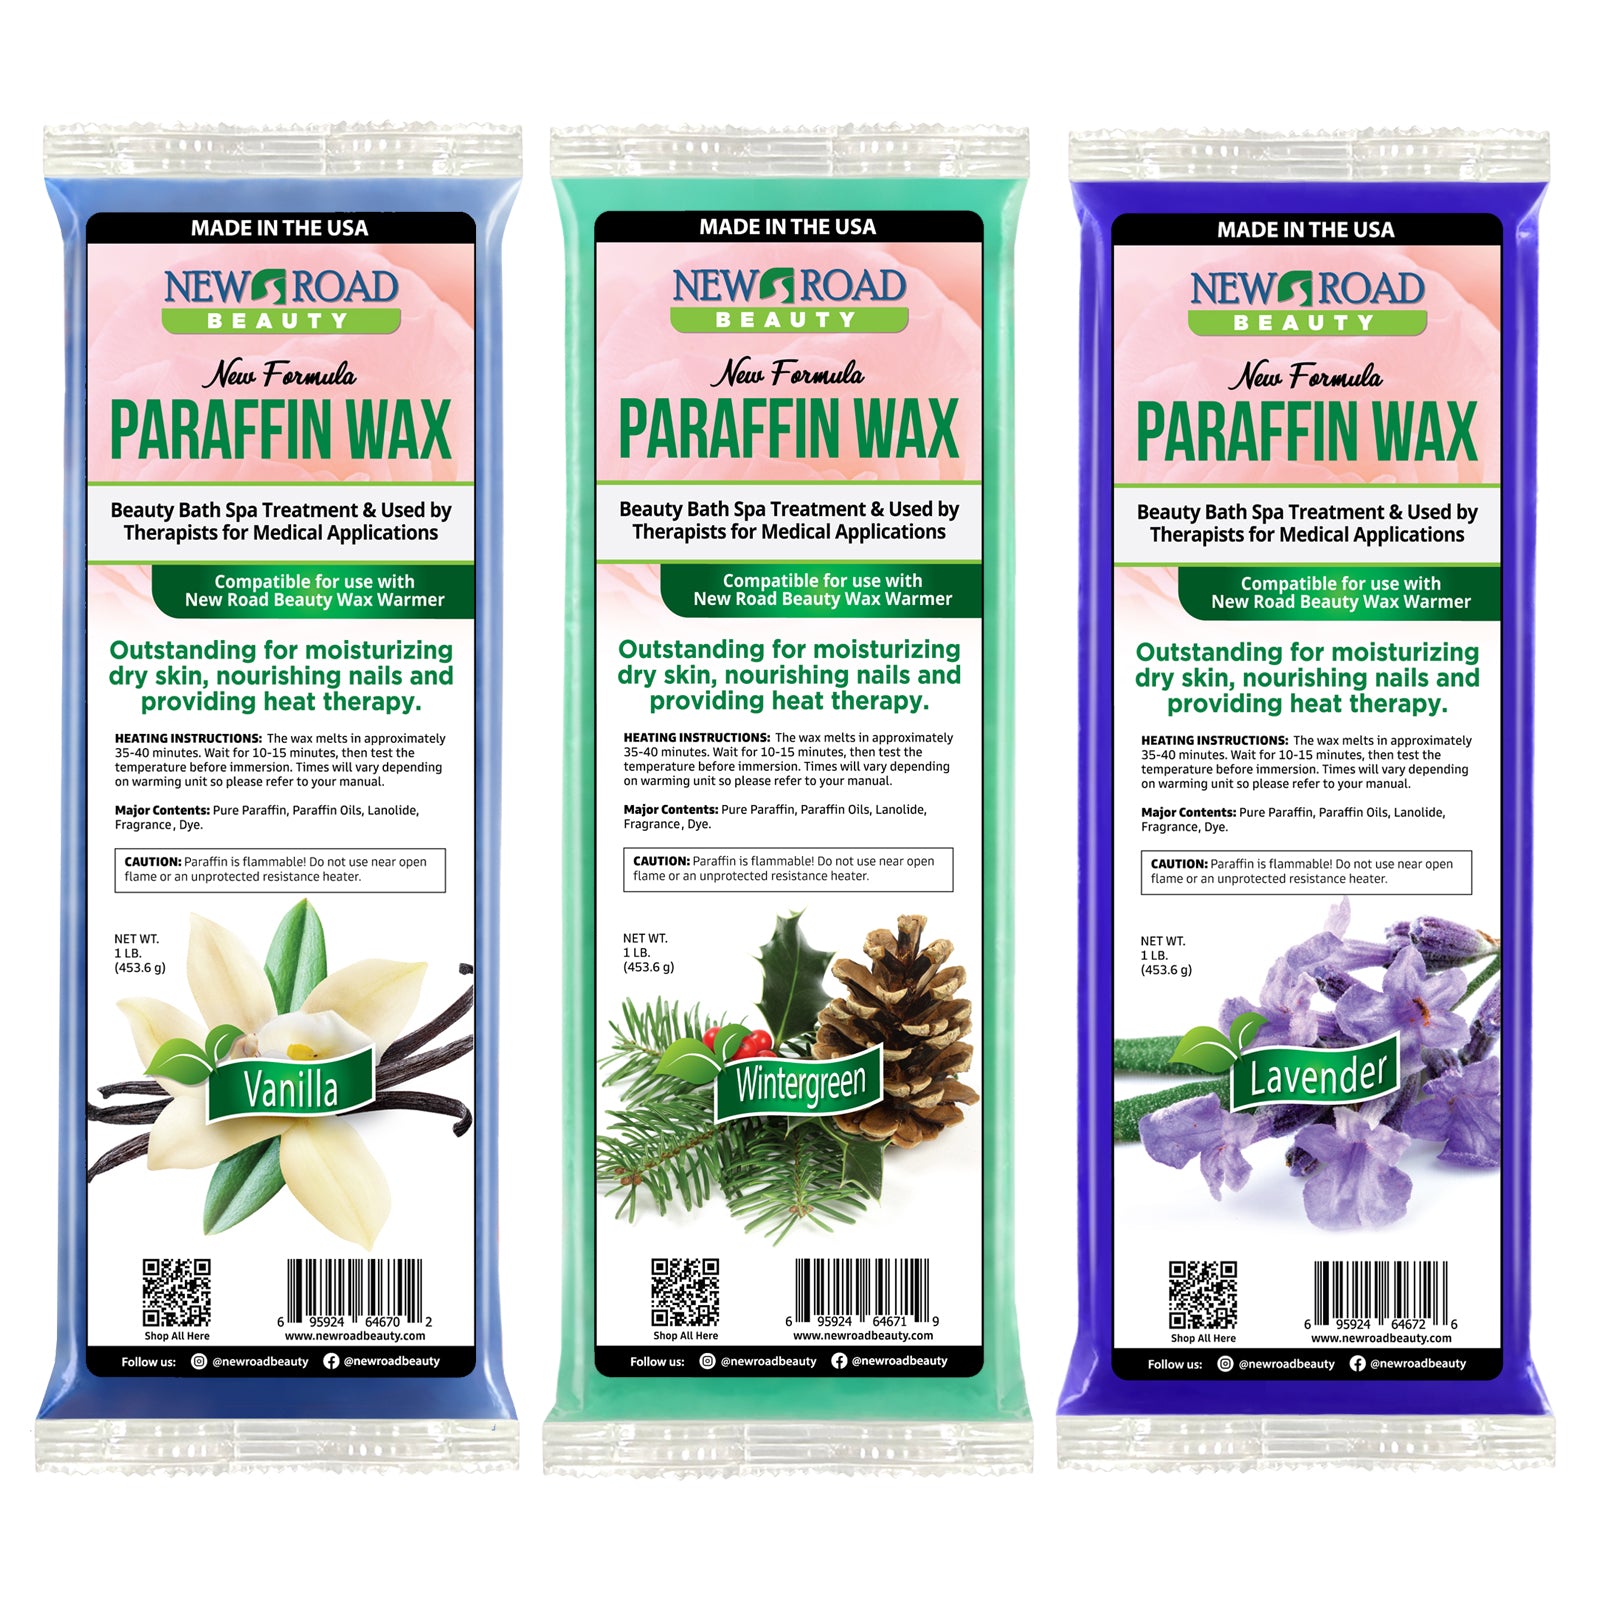 Combo 3-Pack Paraffin Wax For Soft, Moisturized Skin - Vanilla, Wintergreen, and Lavender Paraffin Wax